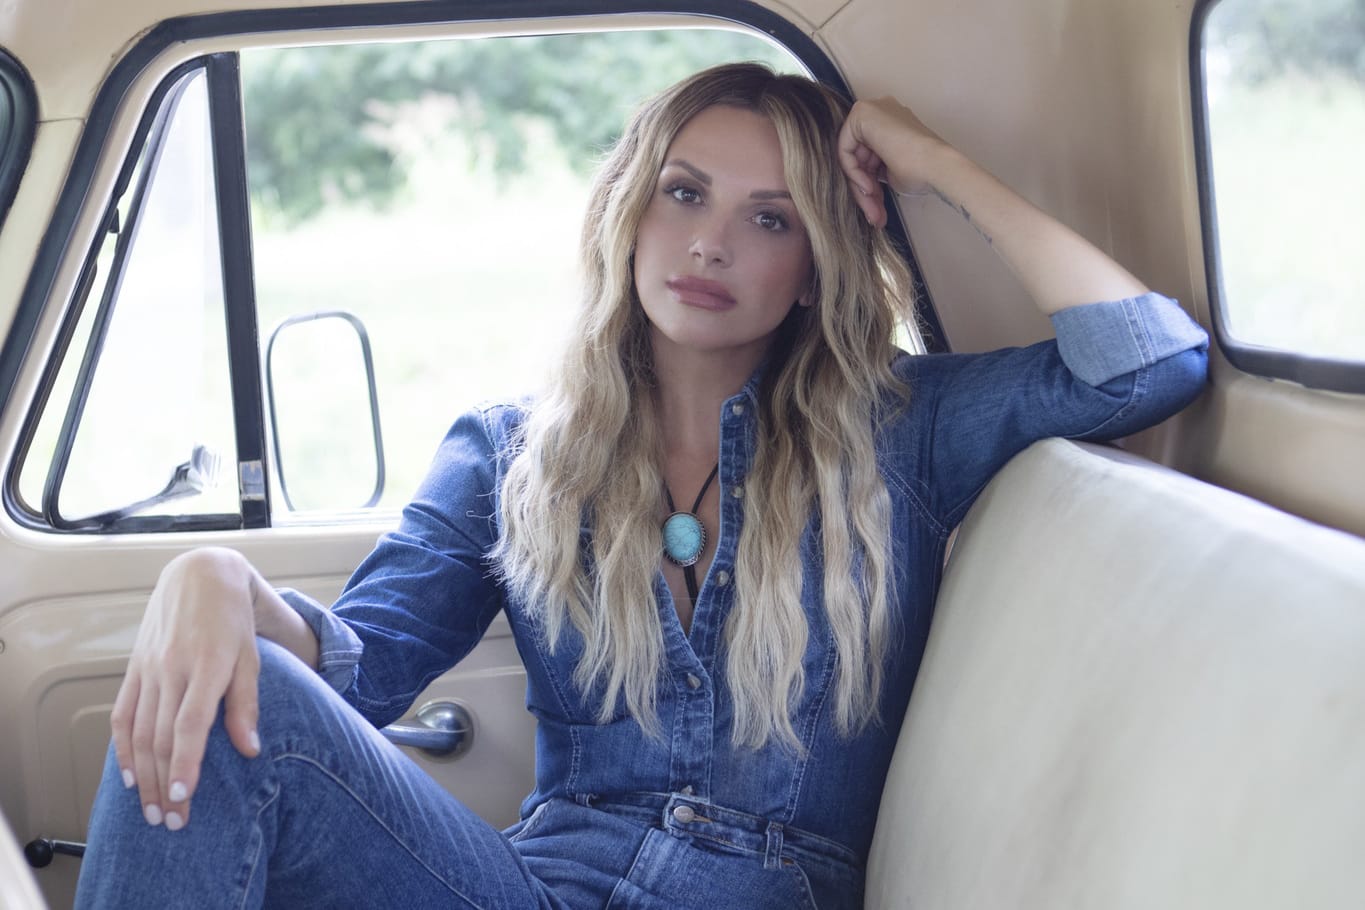 Carly Pearce Returns with Her Kind of Country